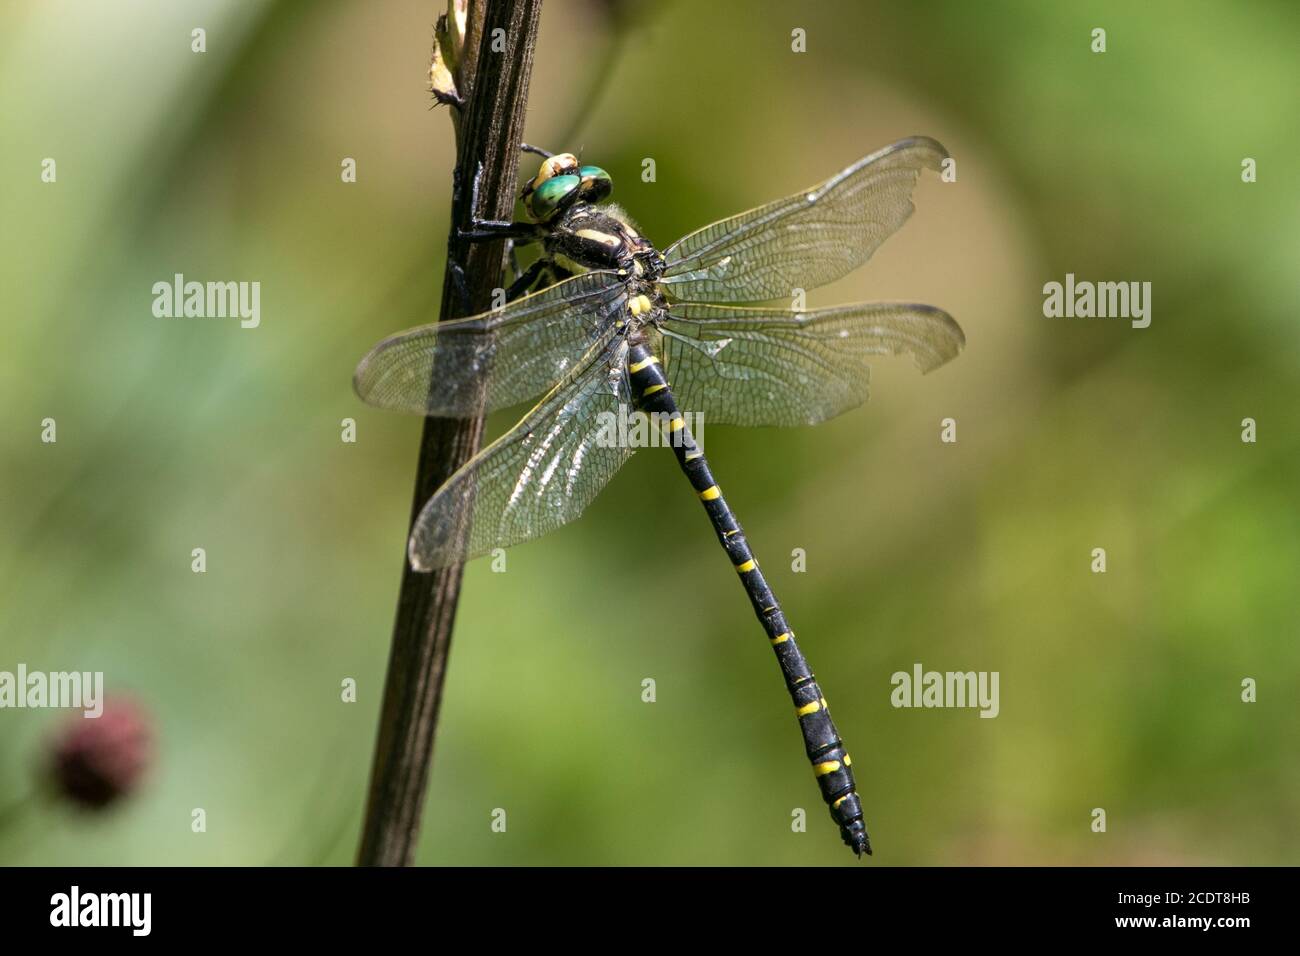 Golden-ringed dragonfly resting on a twig Stock Photo